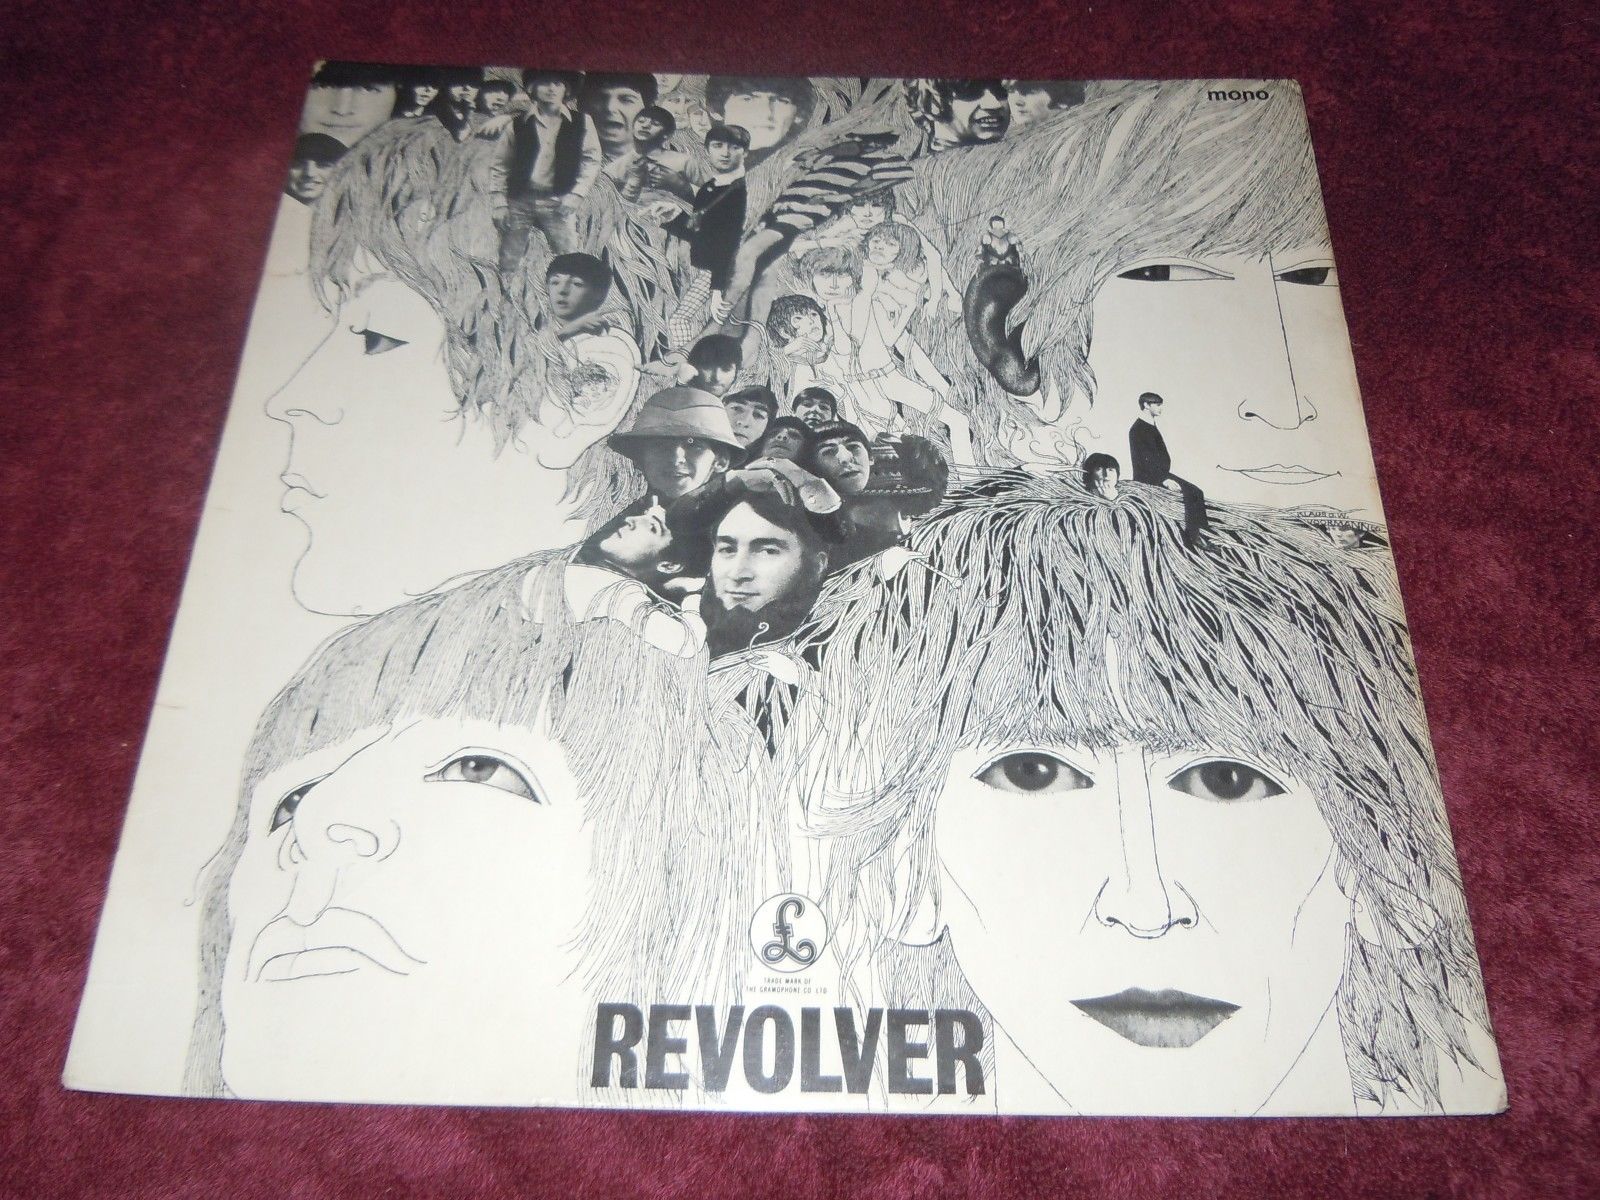  - The Beatles Revolver Mono 1st W/ Never Knows Mix  E J Day Cover EX+ - auction details